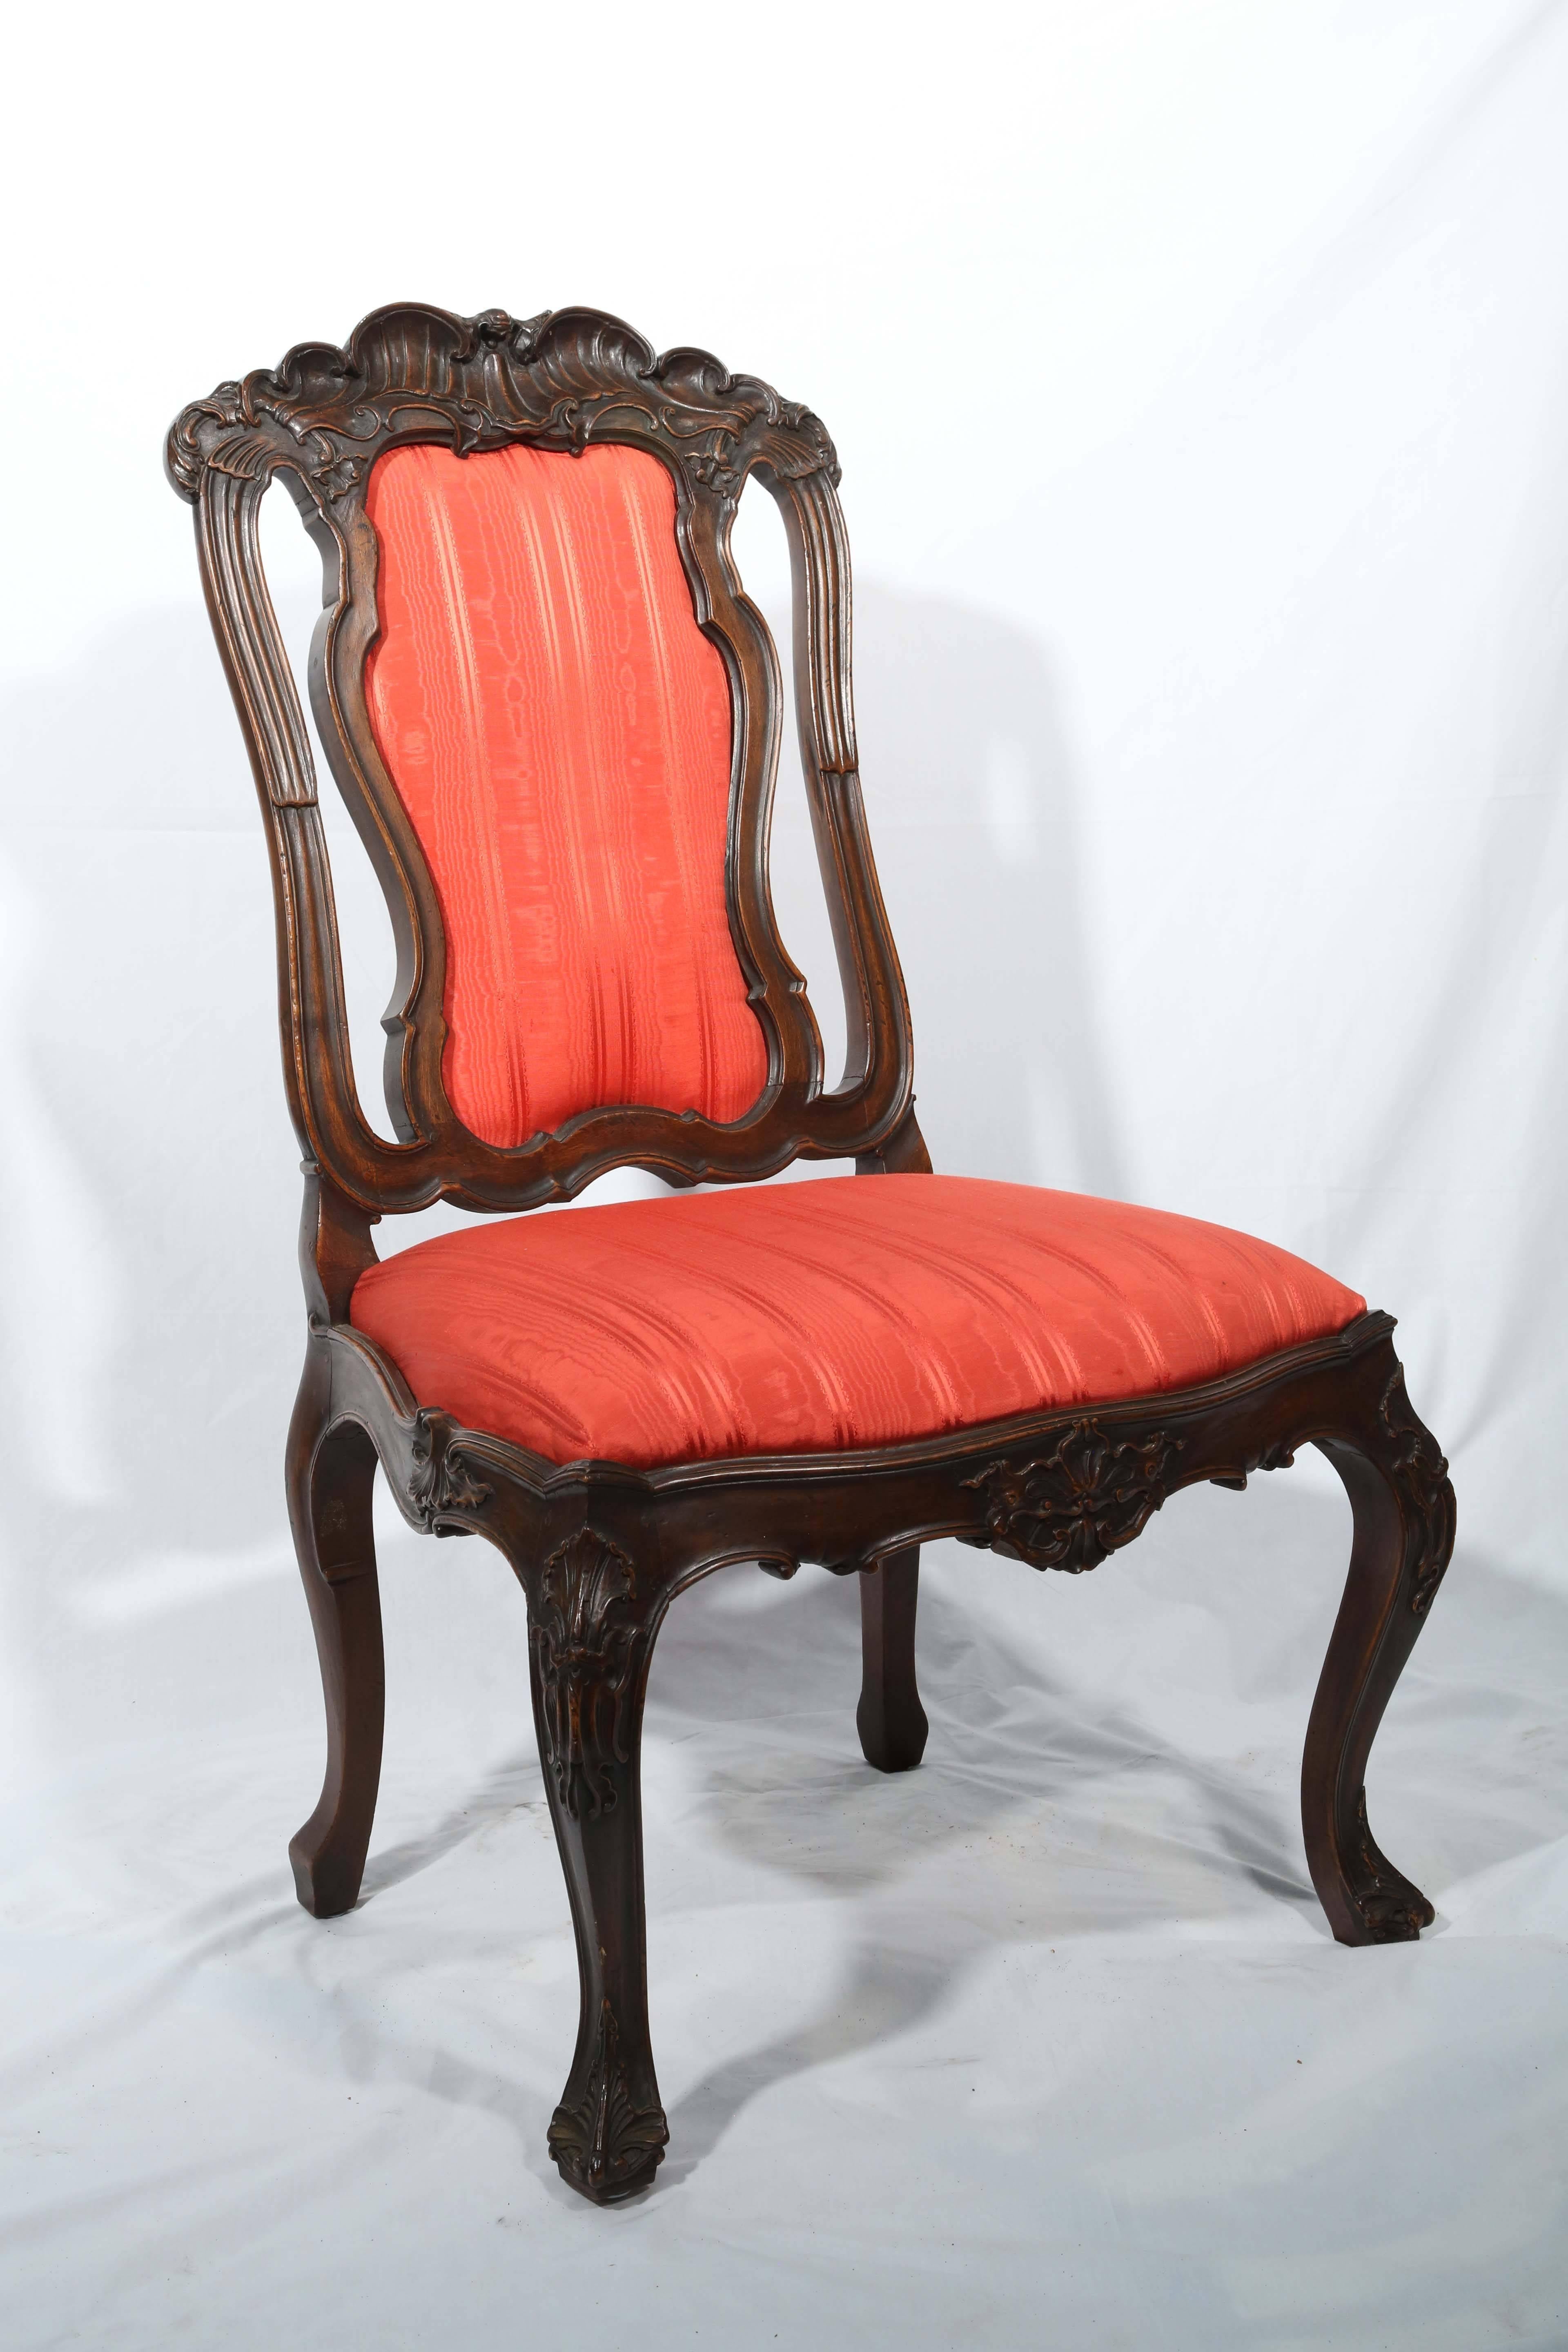 Wide seats, framed for comfort. Highly stylized, with Nouveau accents and shell-like carved 